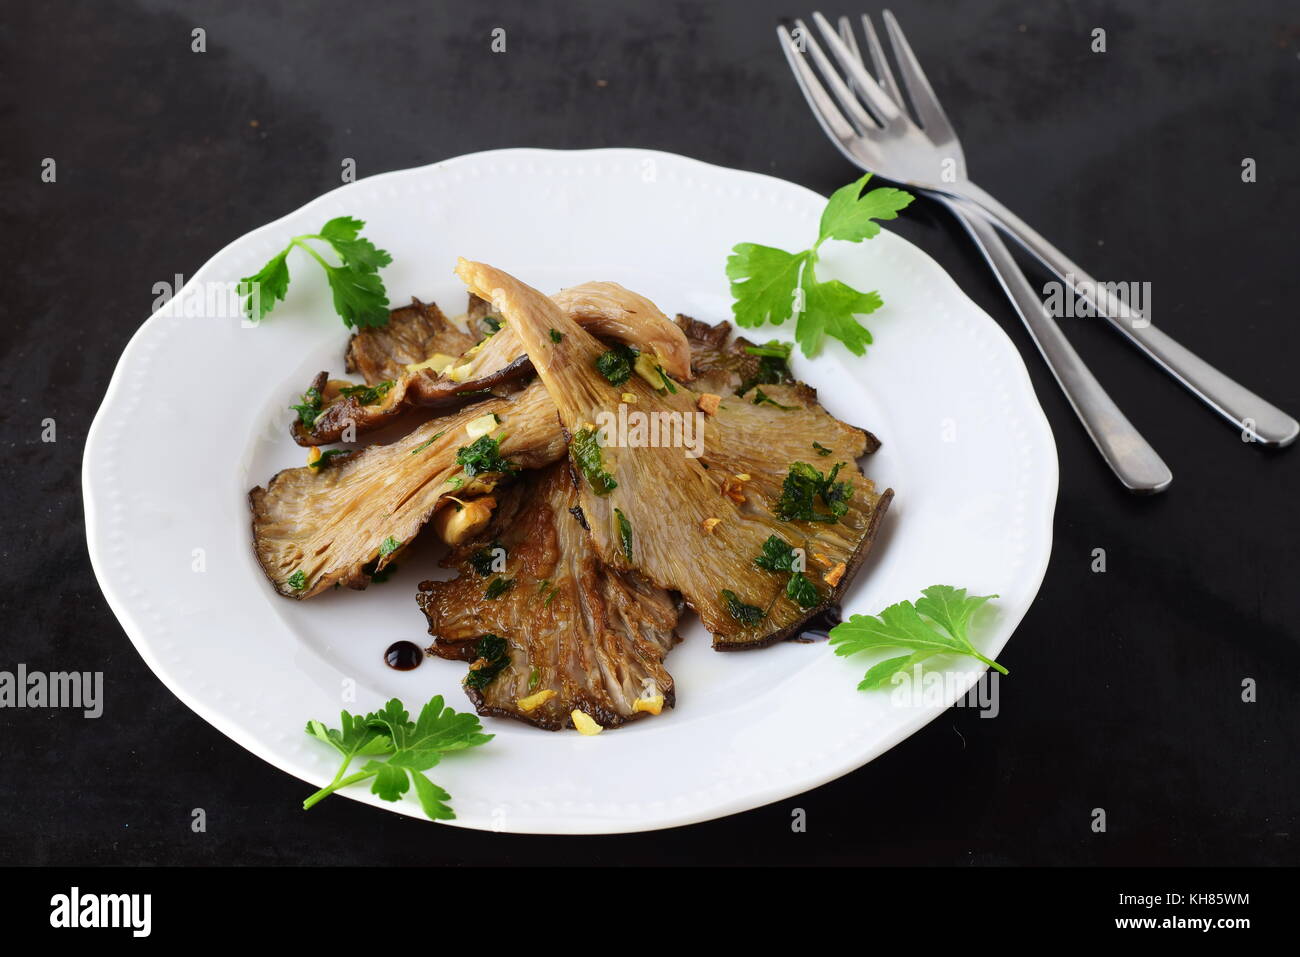 Fried Oyster mushrooms with garlic, parsley and balsamic glaze in a white plate on a black abstract background. Healthy concept. Stock Photo